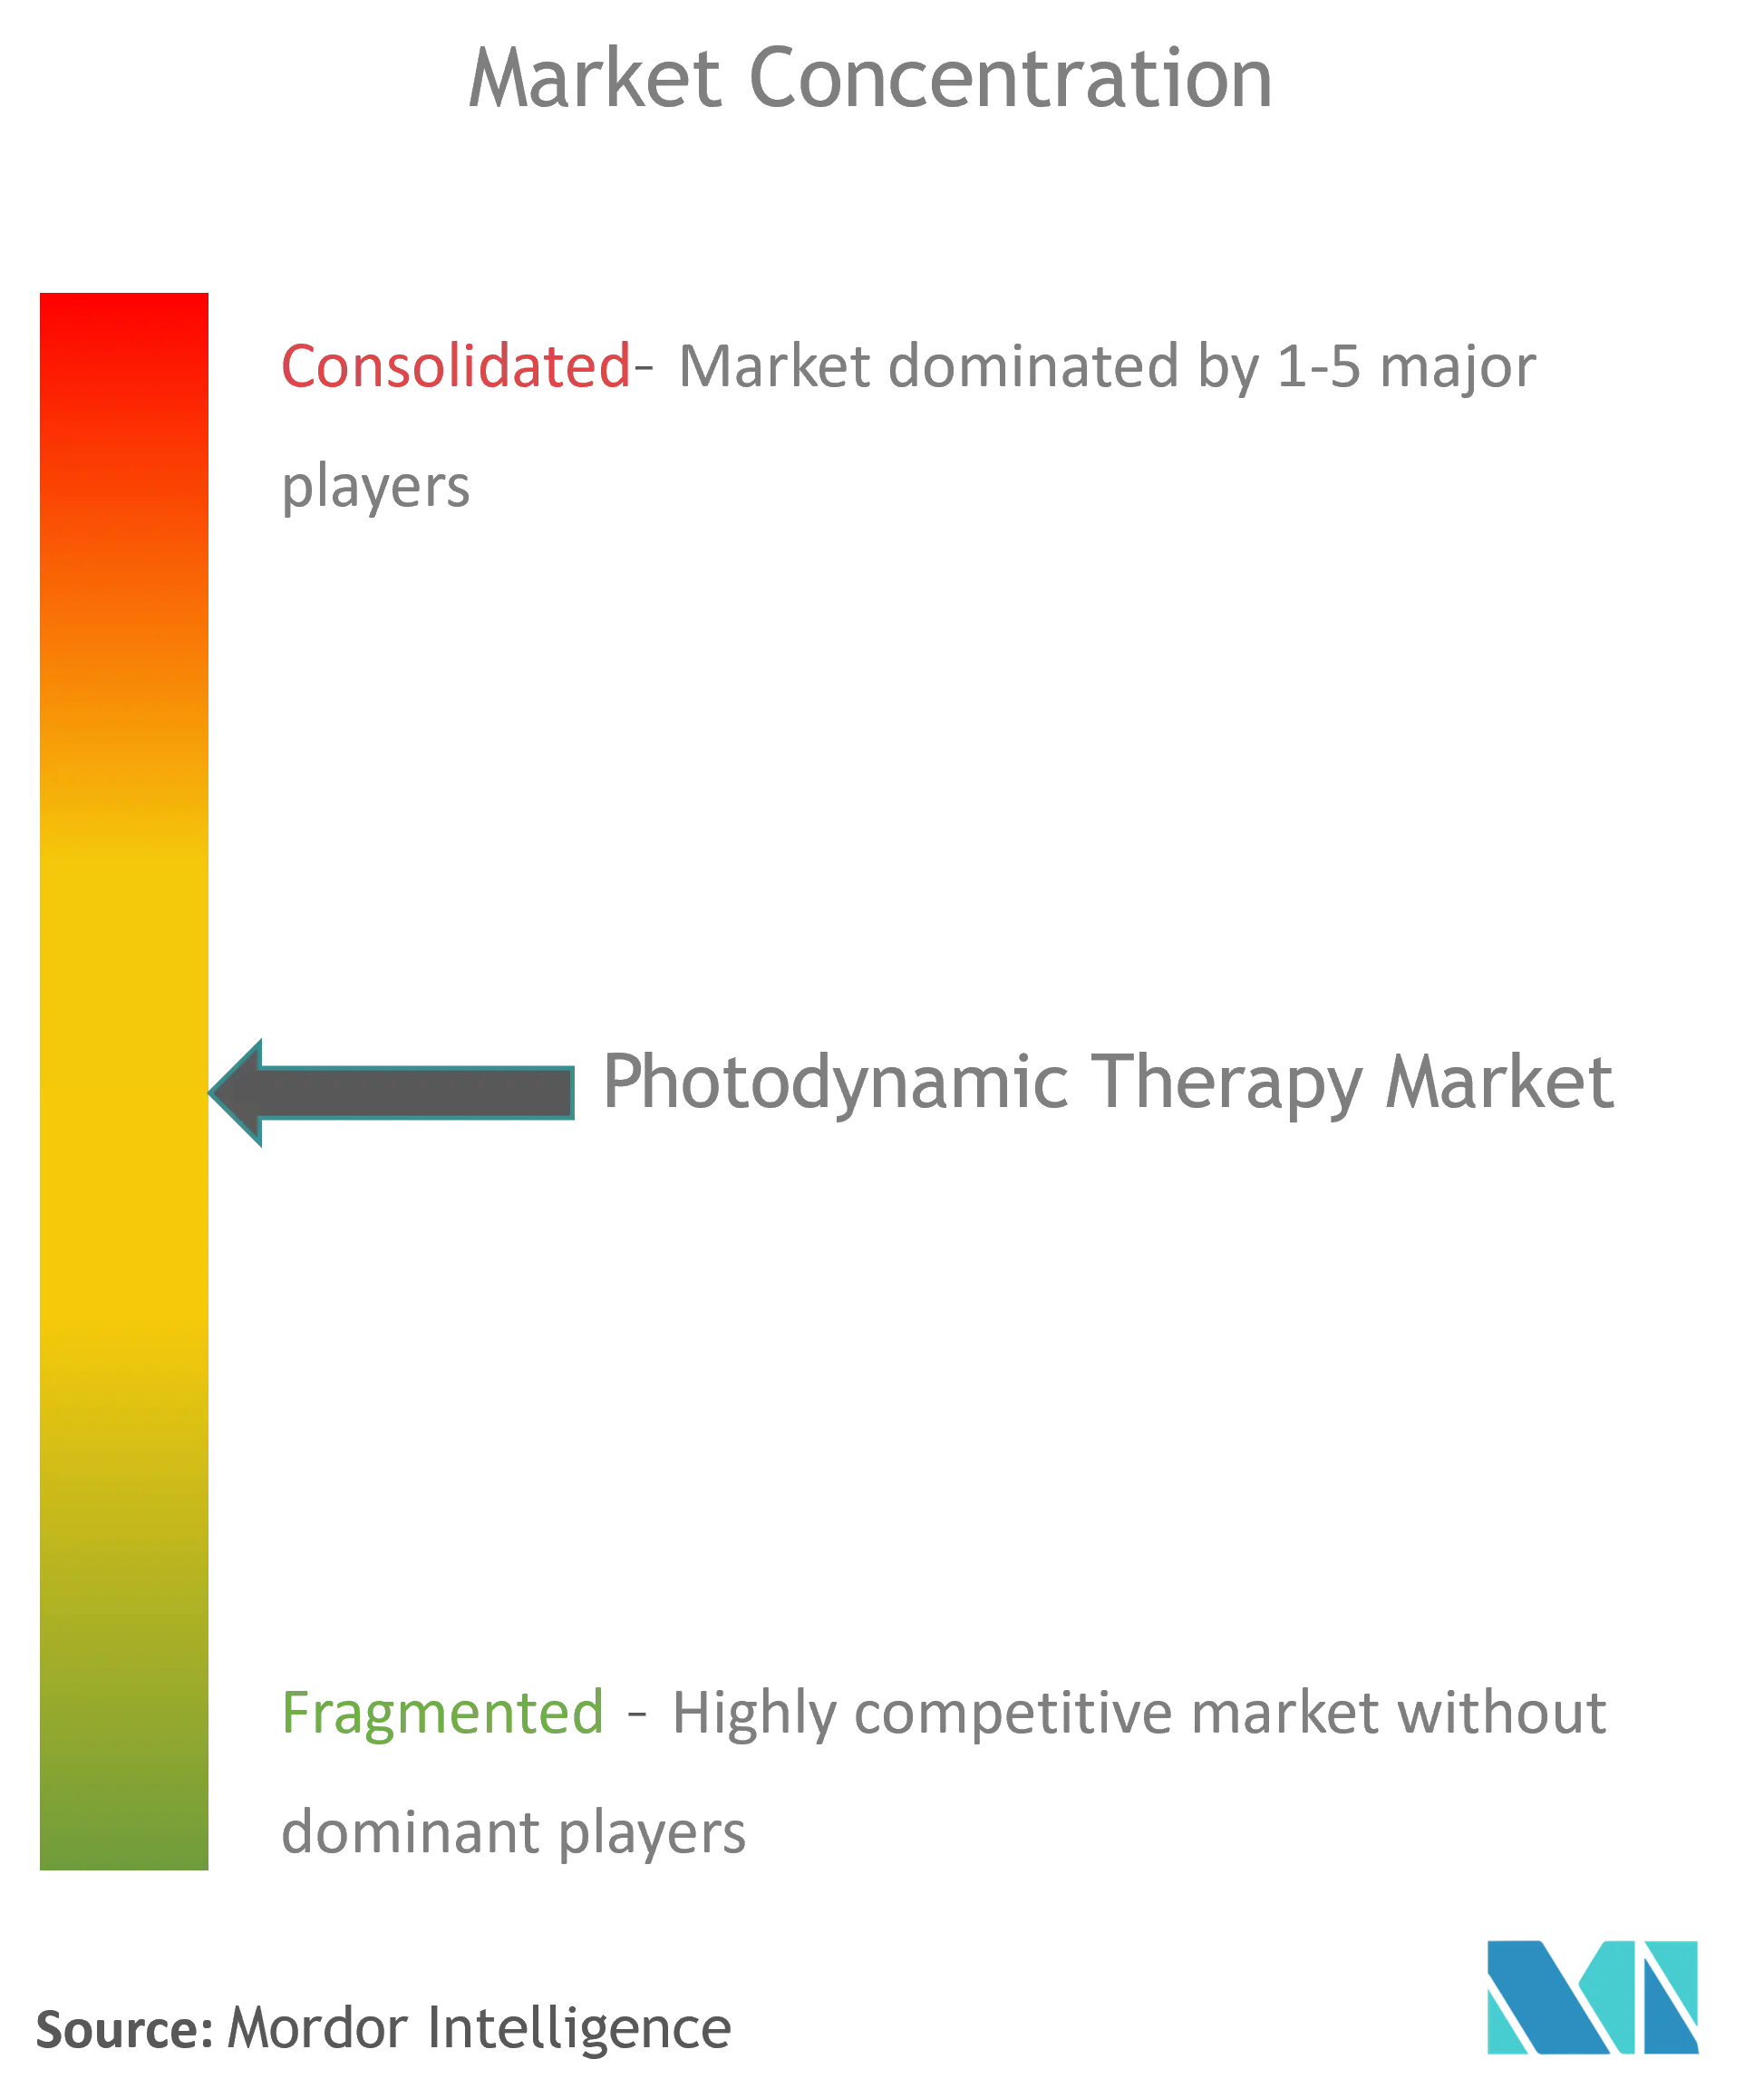 Photodynamic Therapy Market_CL.png